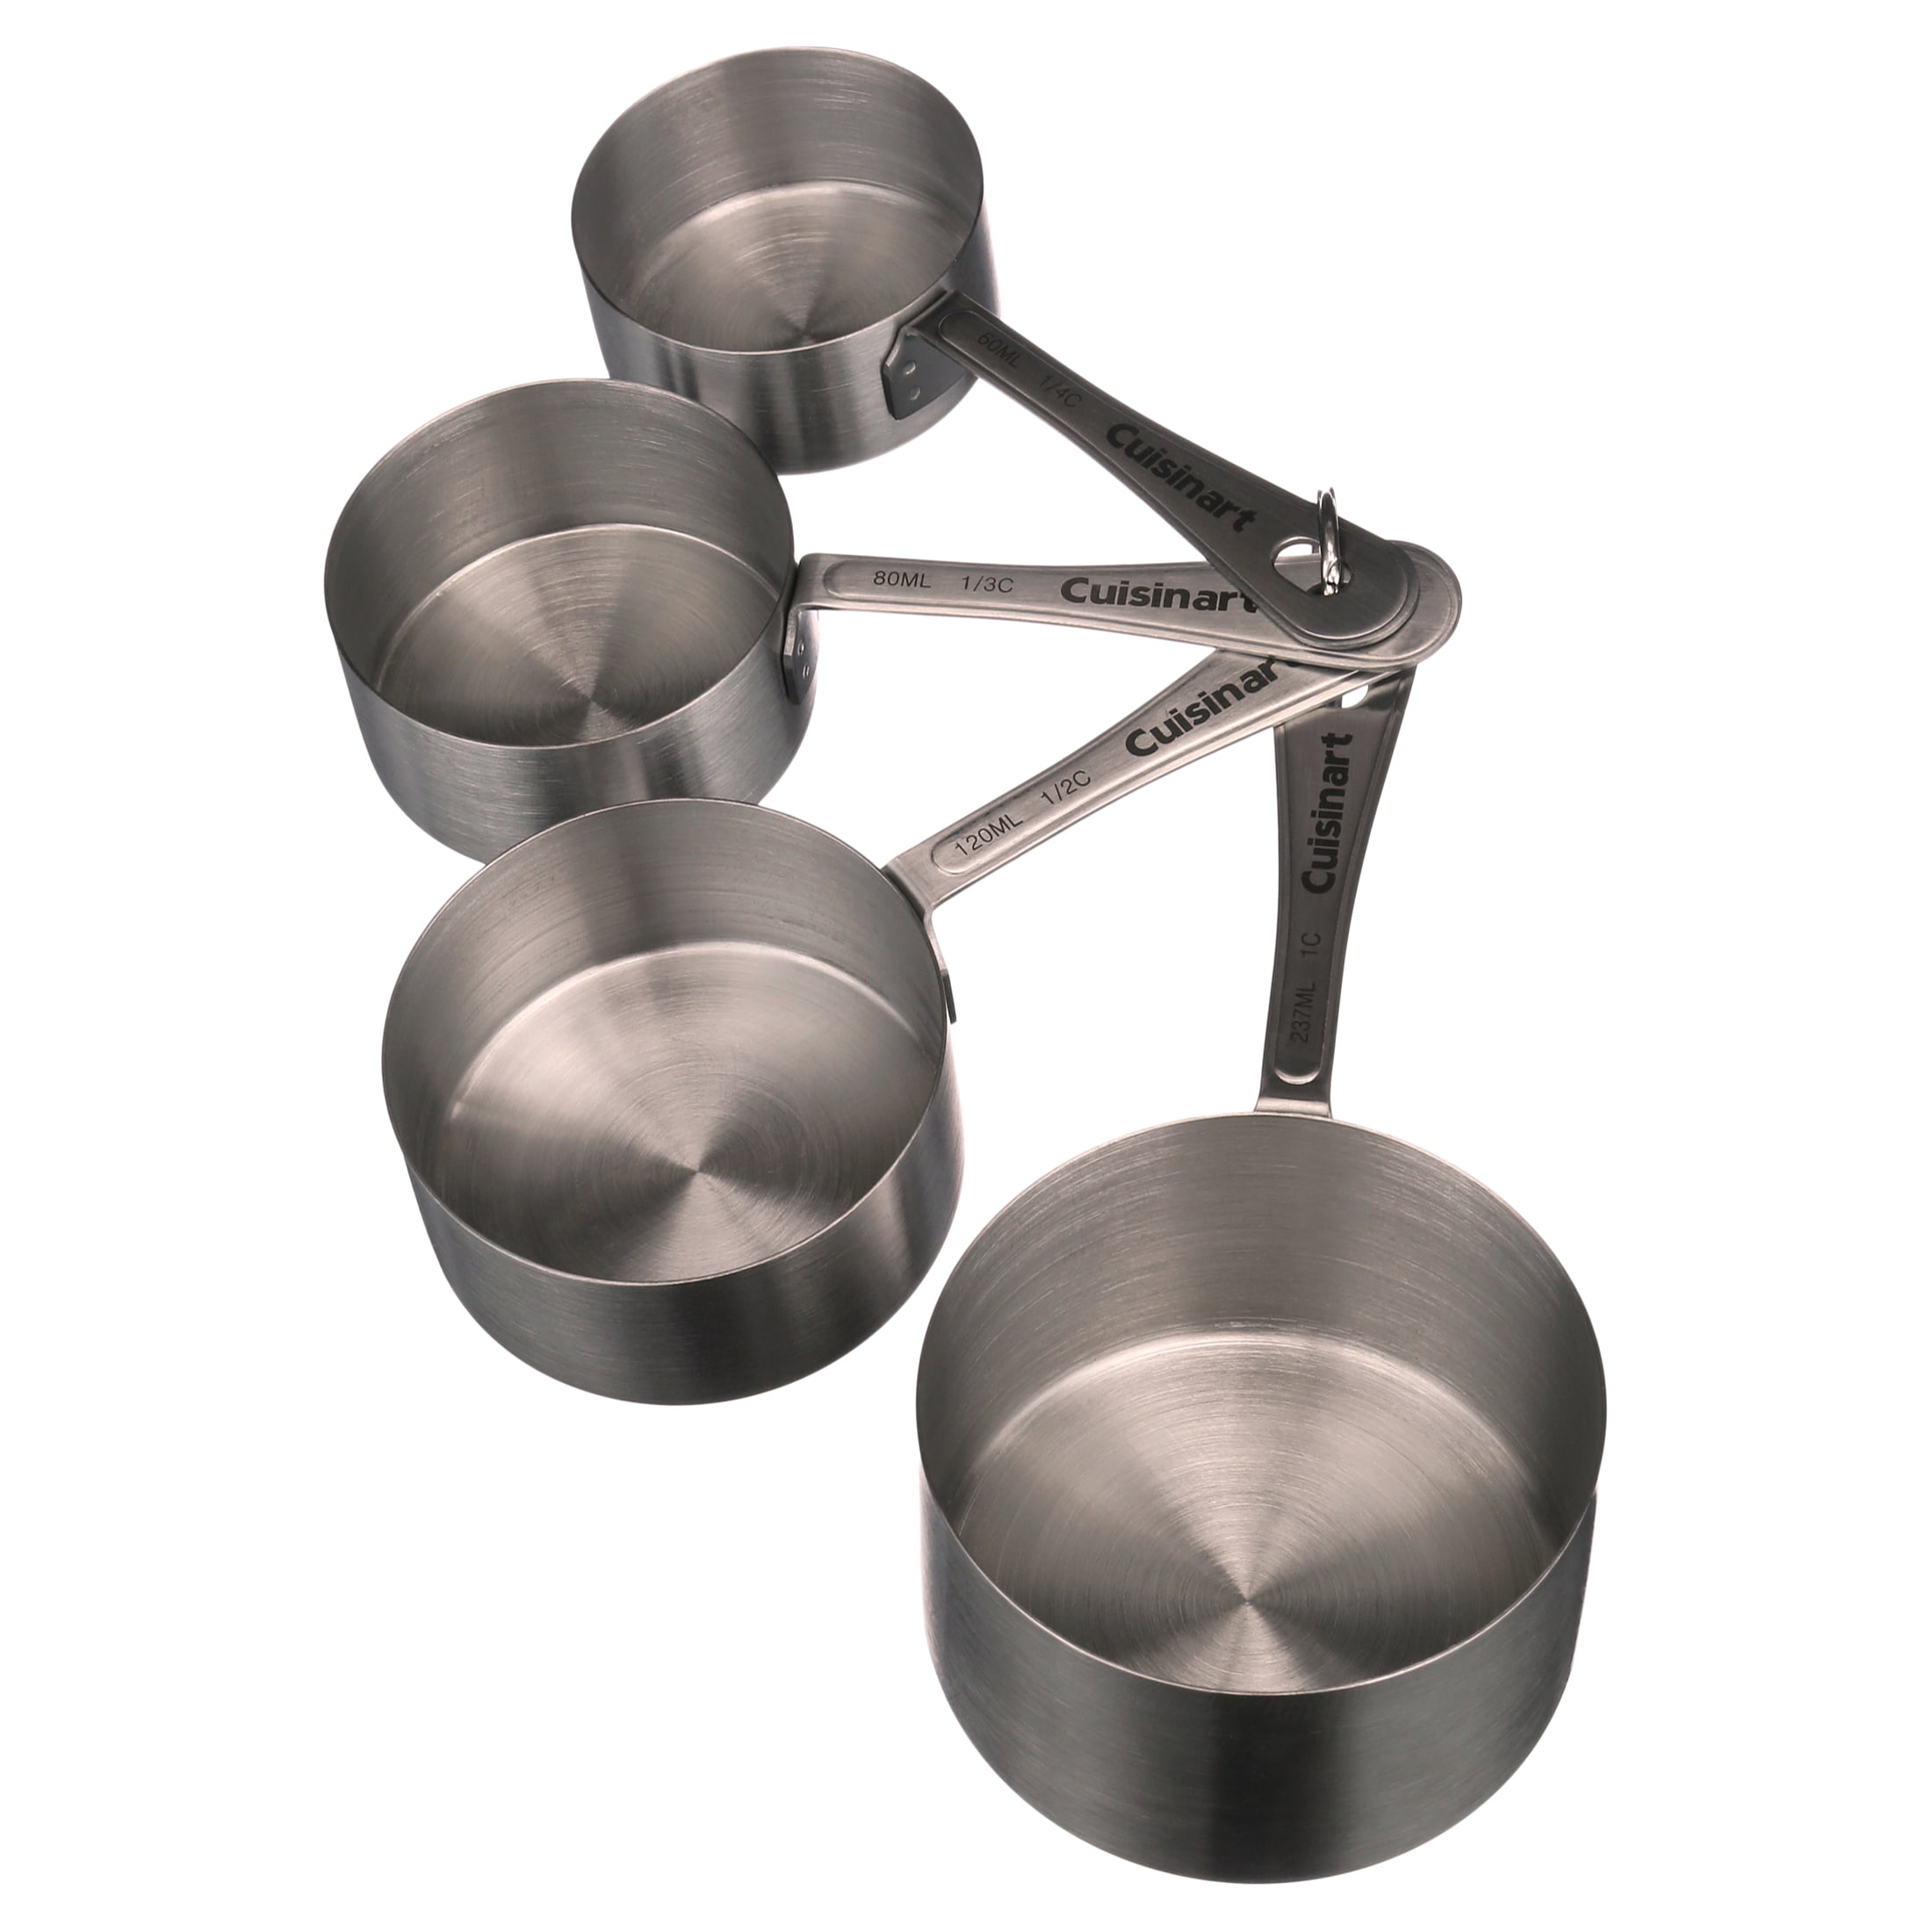 Cuisinart Non-Handled Stainless Steel Measuring Cups 